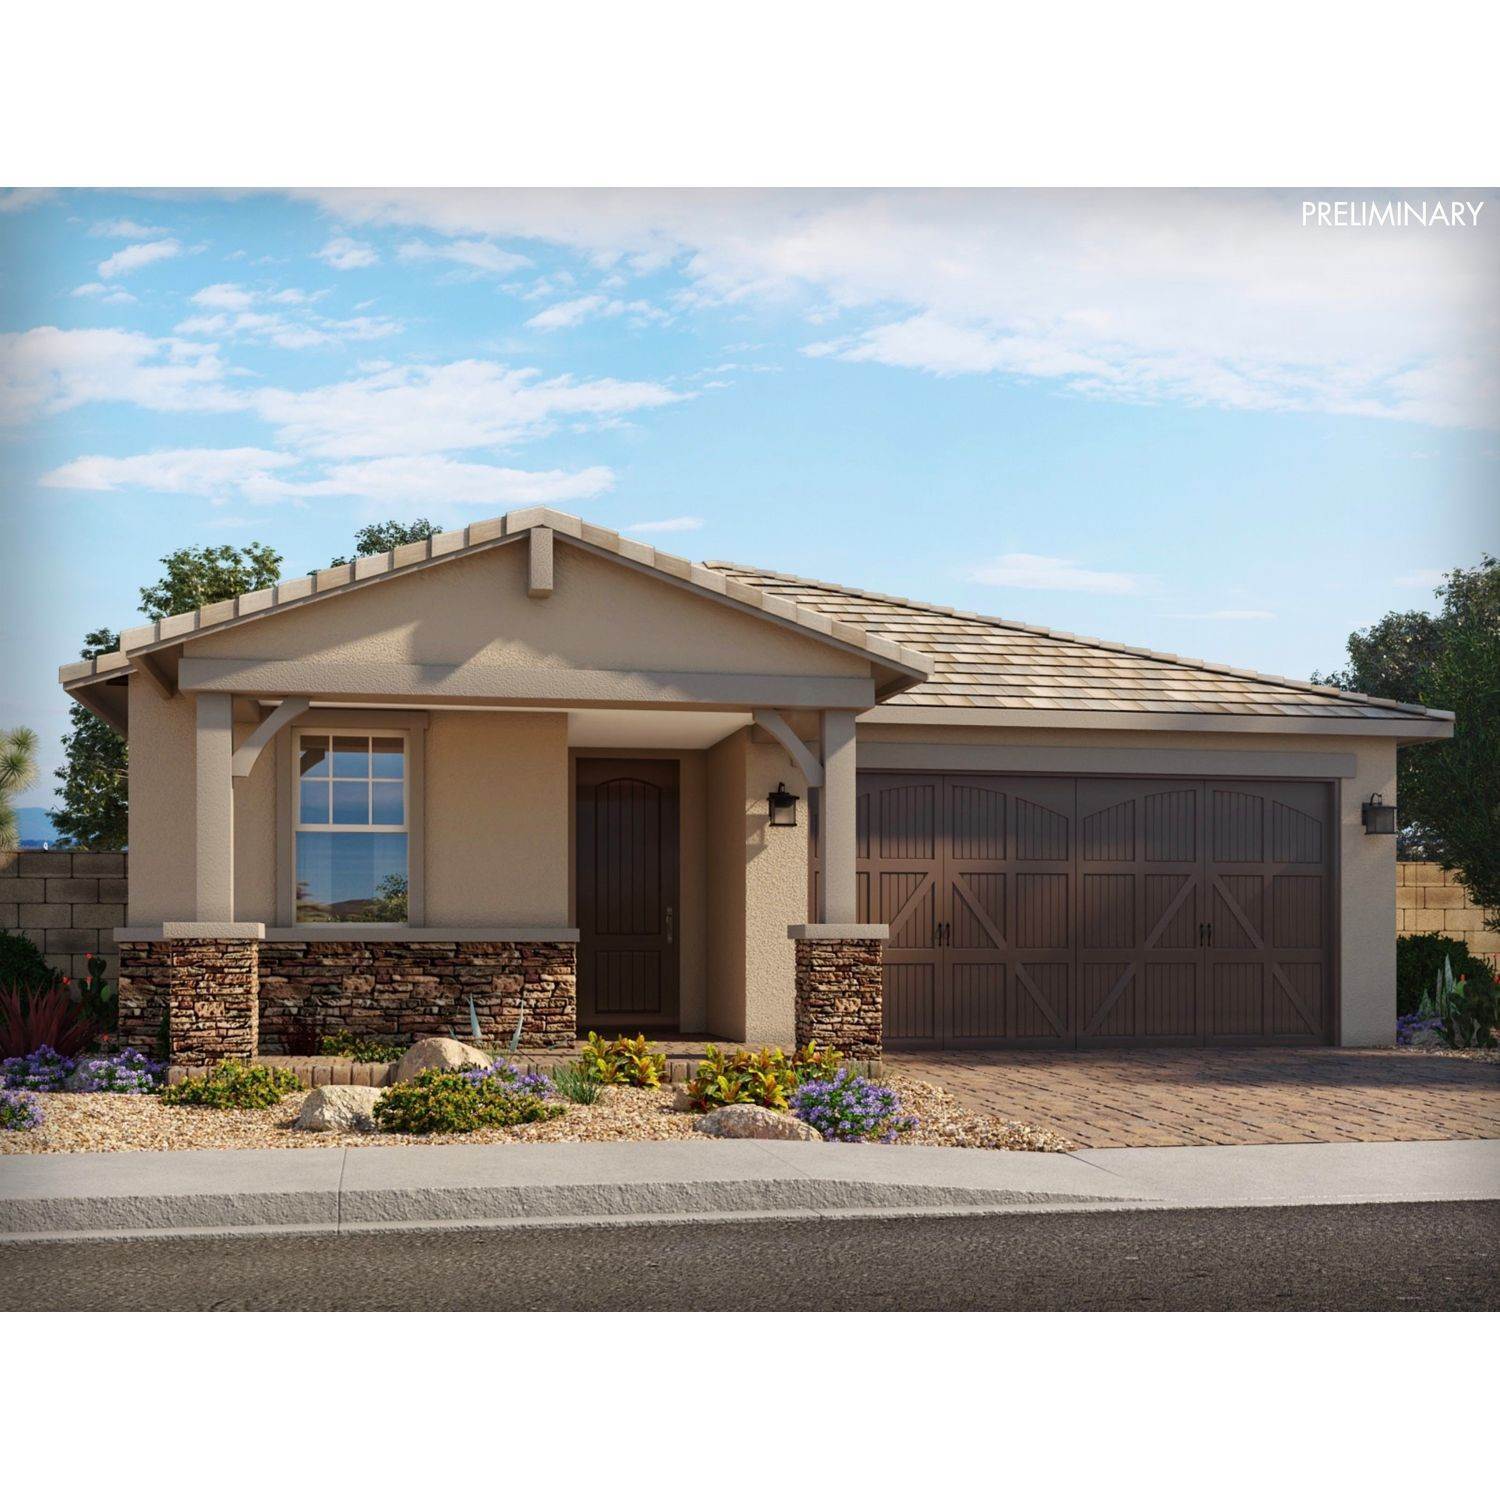 Single Family for Sale at Tolleson, AZ 85353